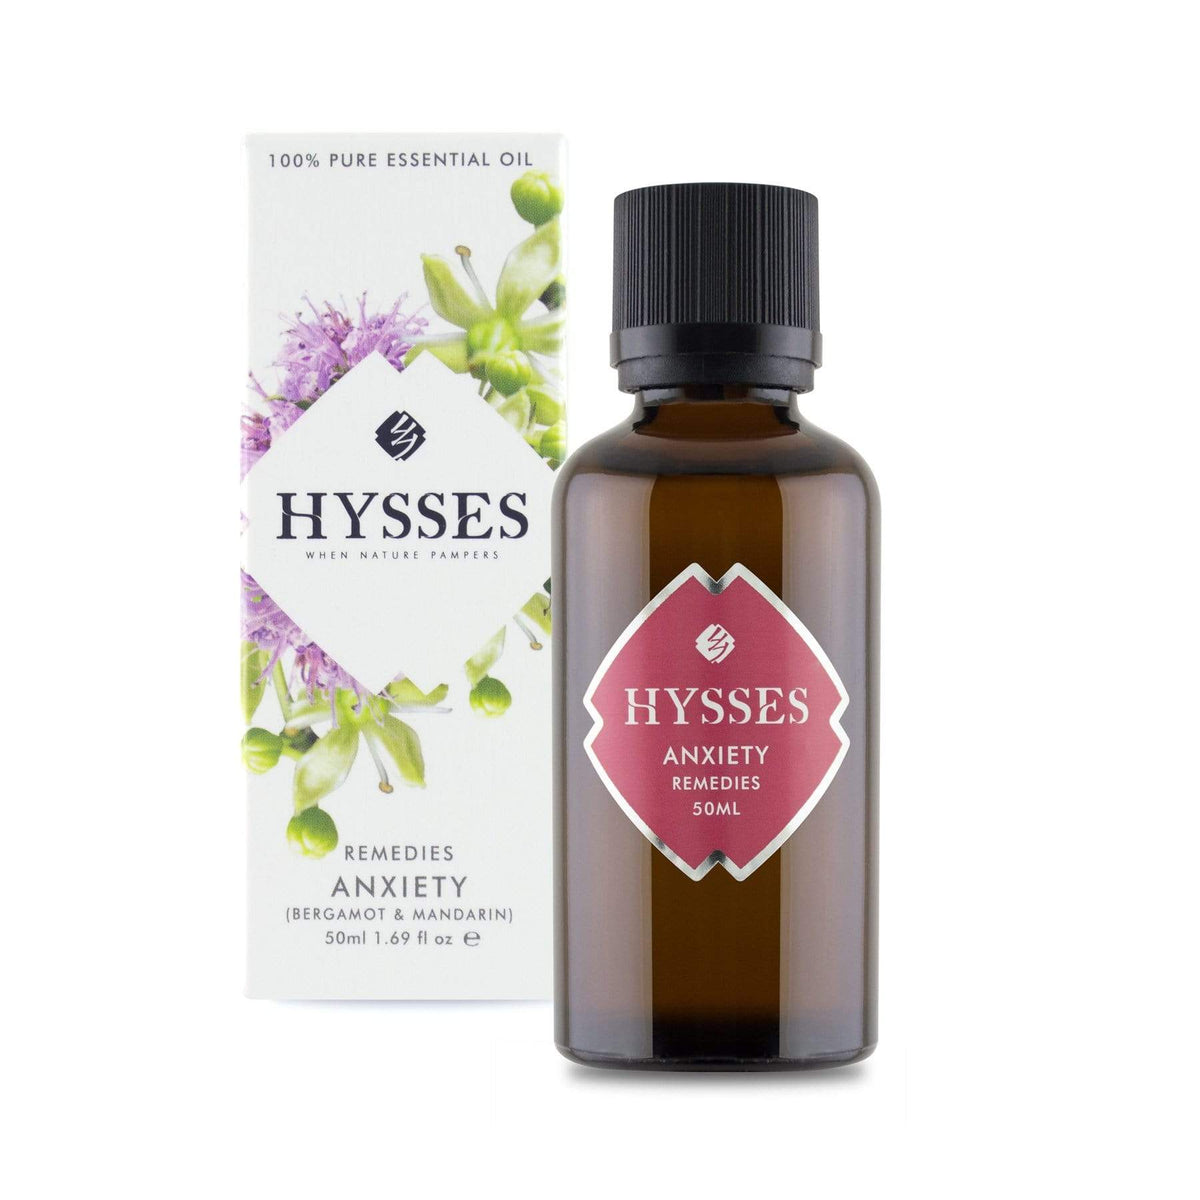 Hysses Essential Oil 50ml Remedies, Anxiety